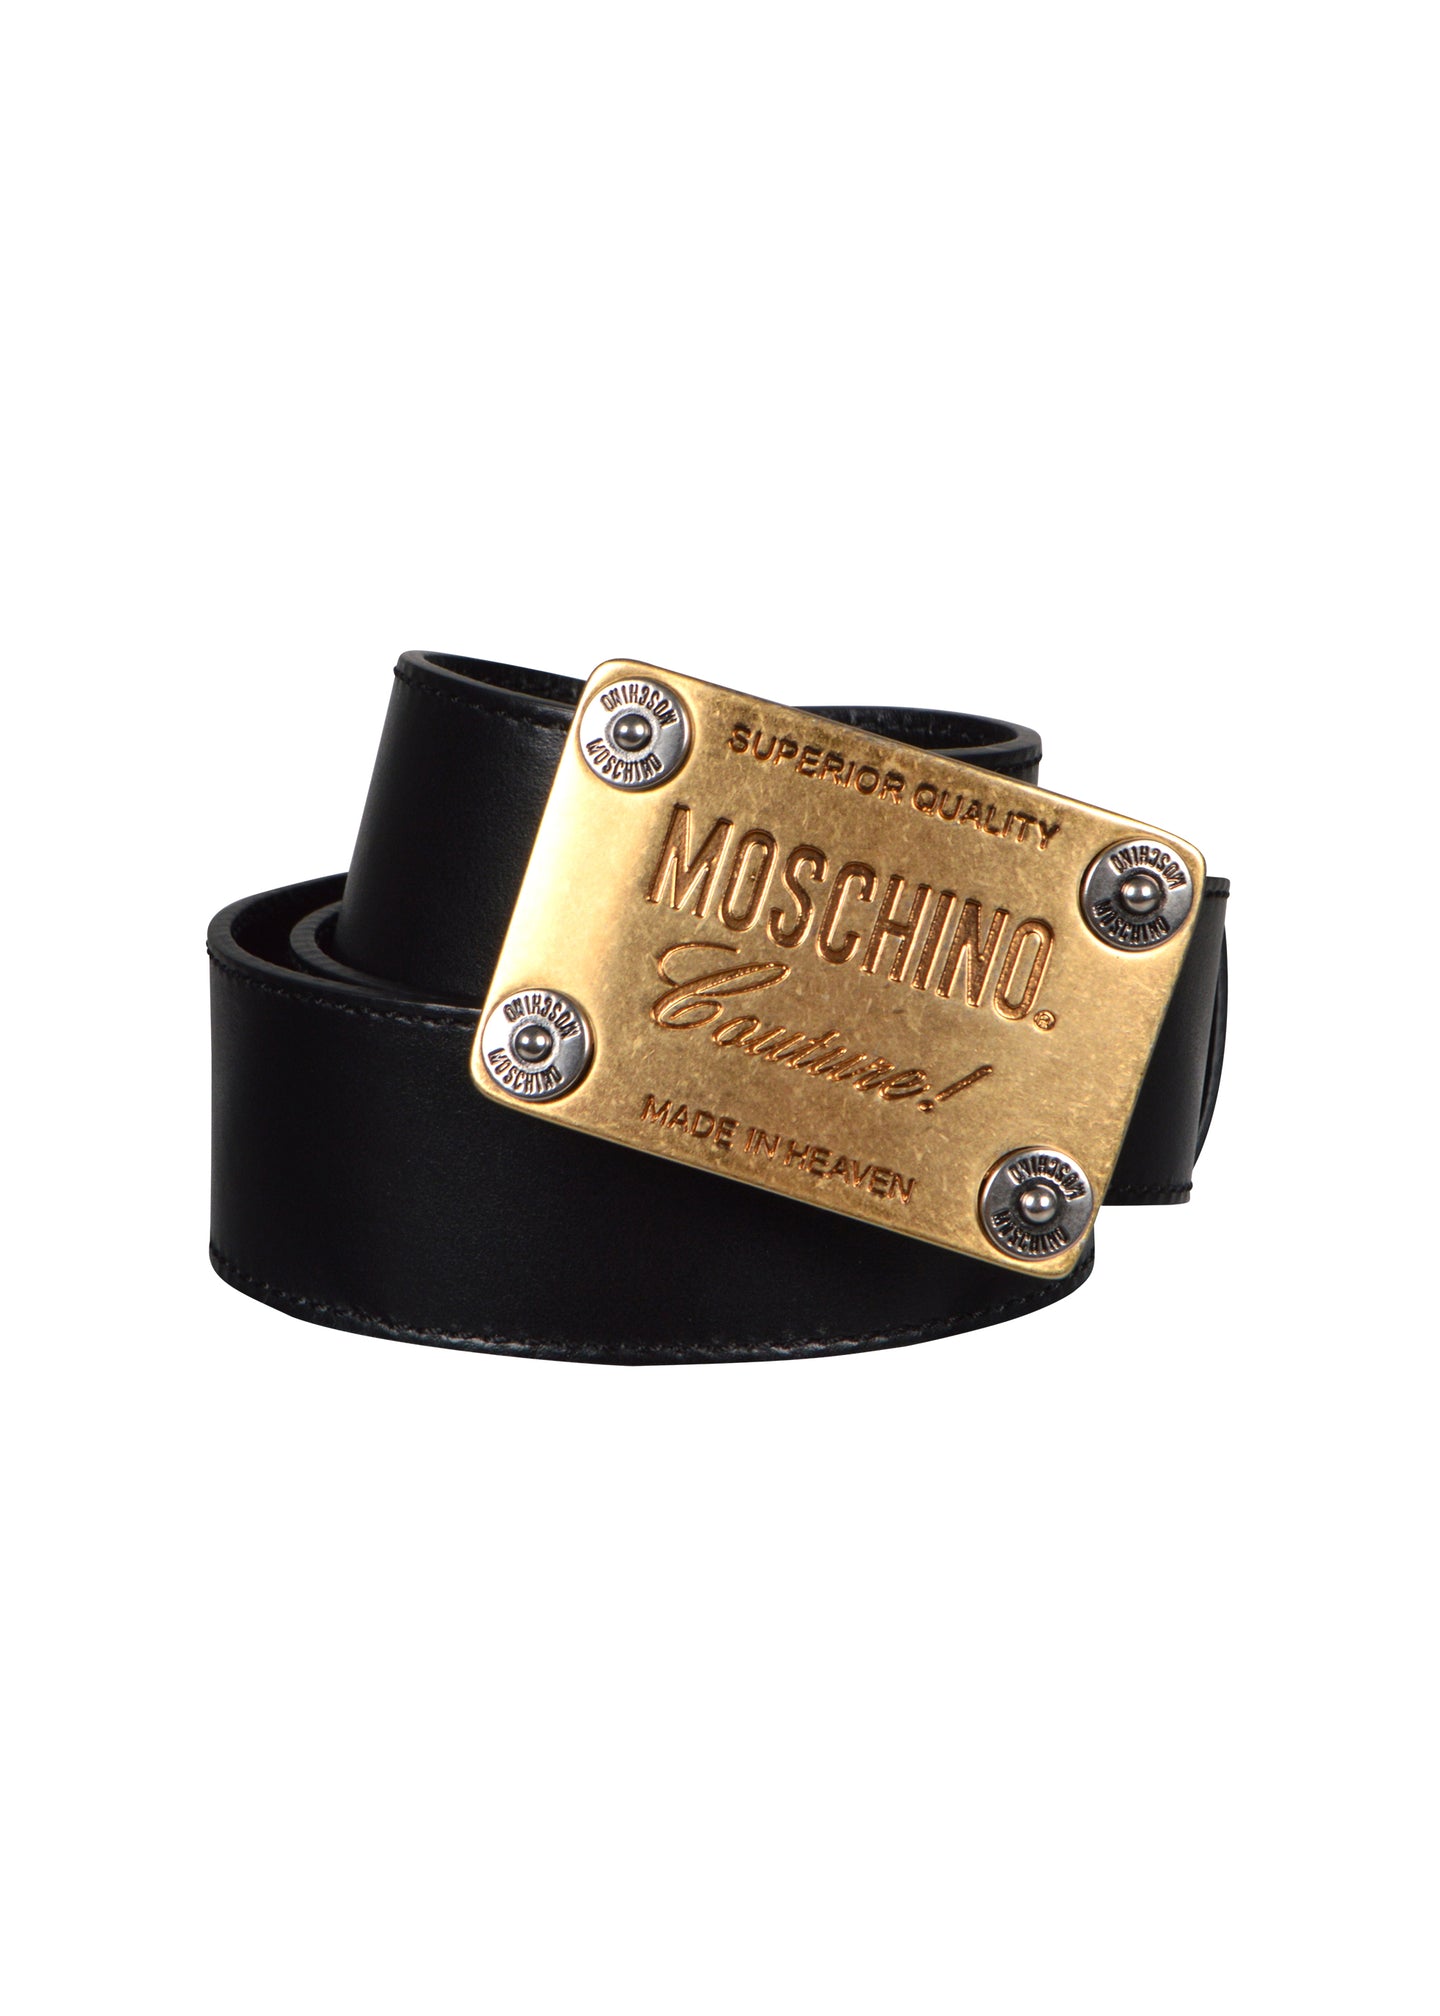 Moschino - Gold Plaque Buckle Moschino Couture Logo Leather Belt - A8011 - 099173 -Black